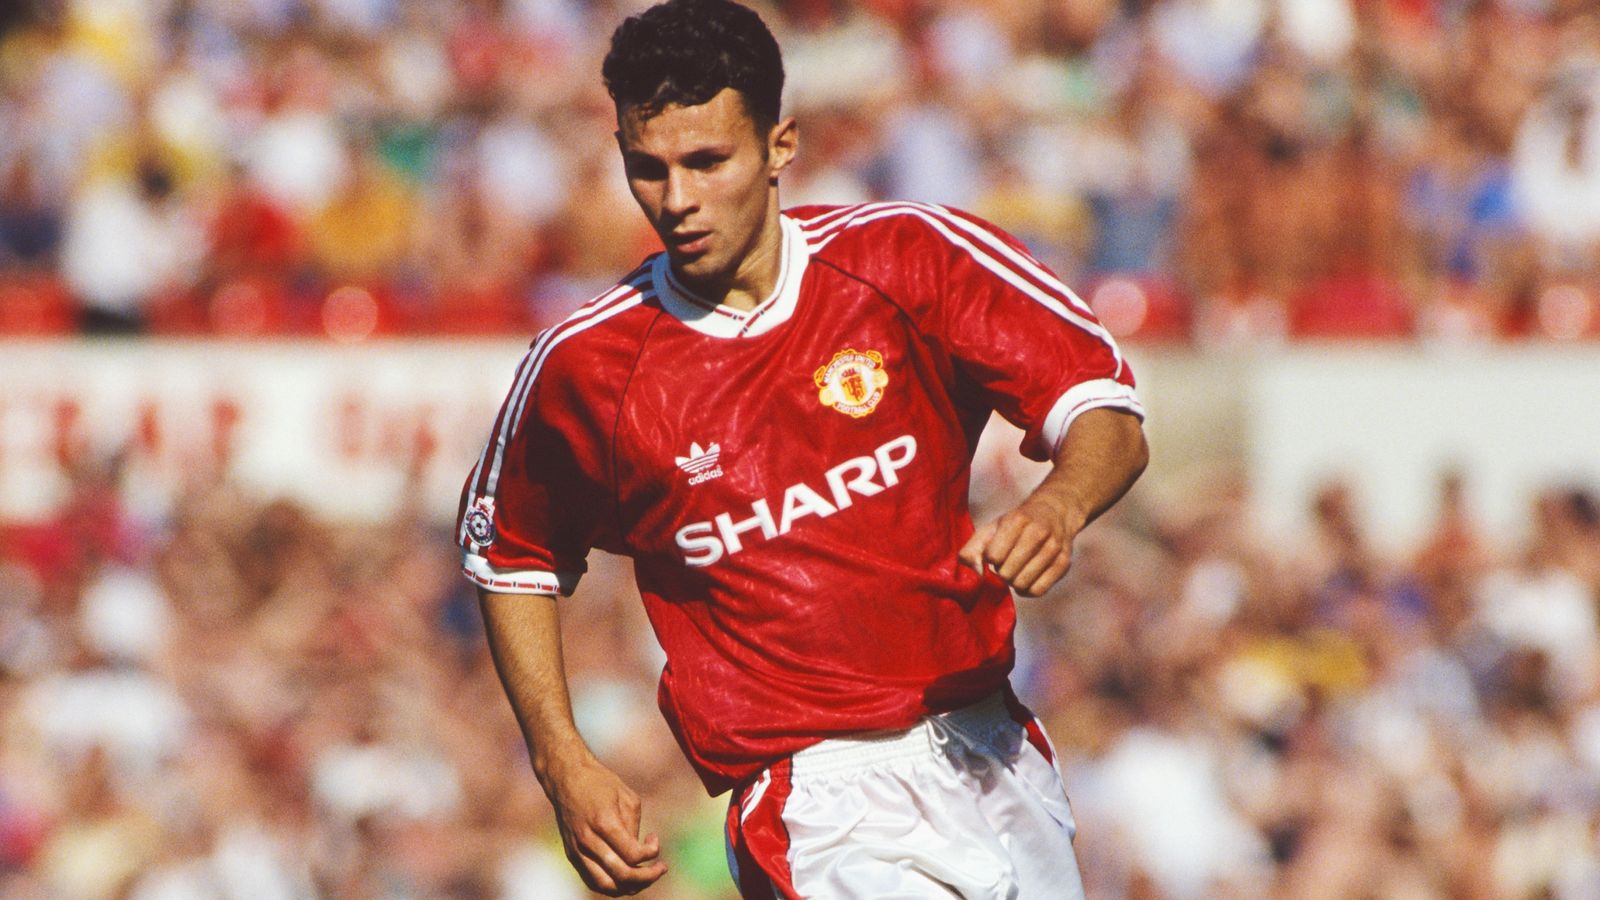 Manchester United and Ryan Giggs have parted company after 29 years | Football News | Sky Sports